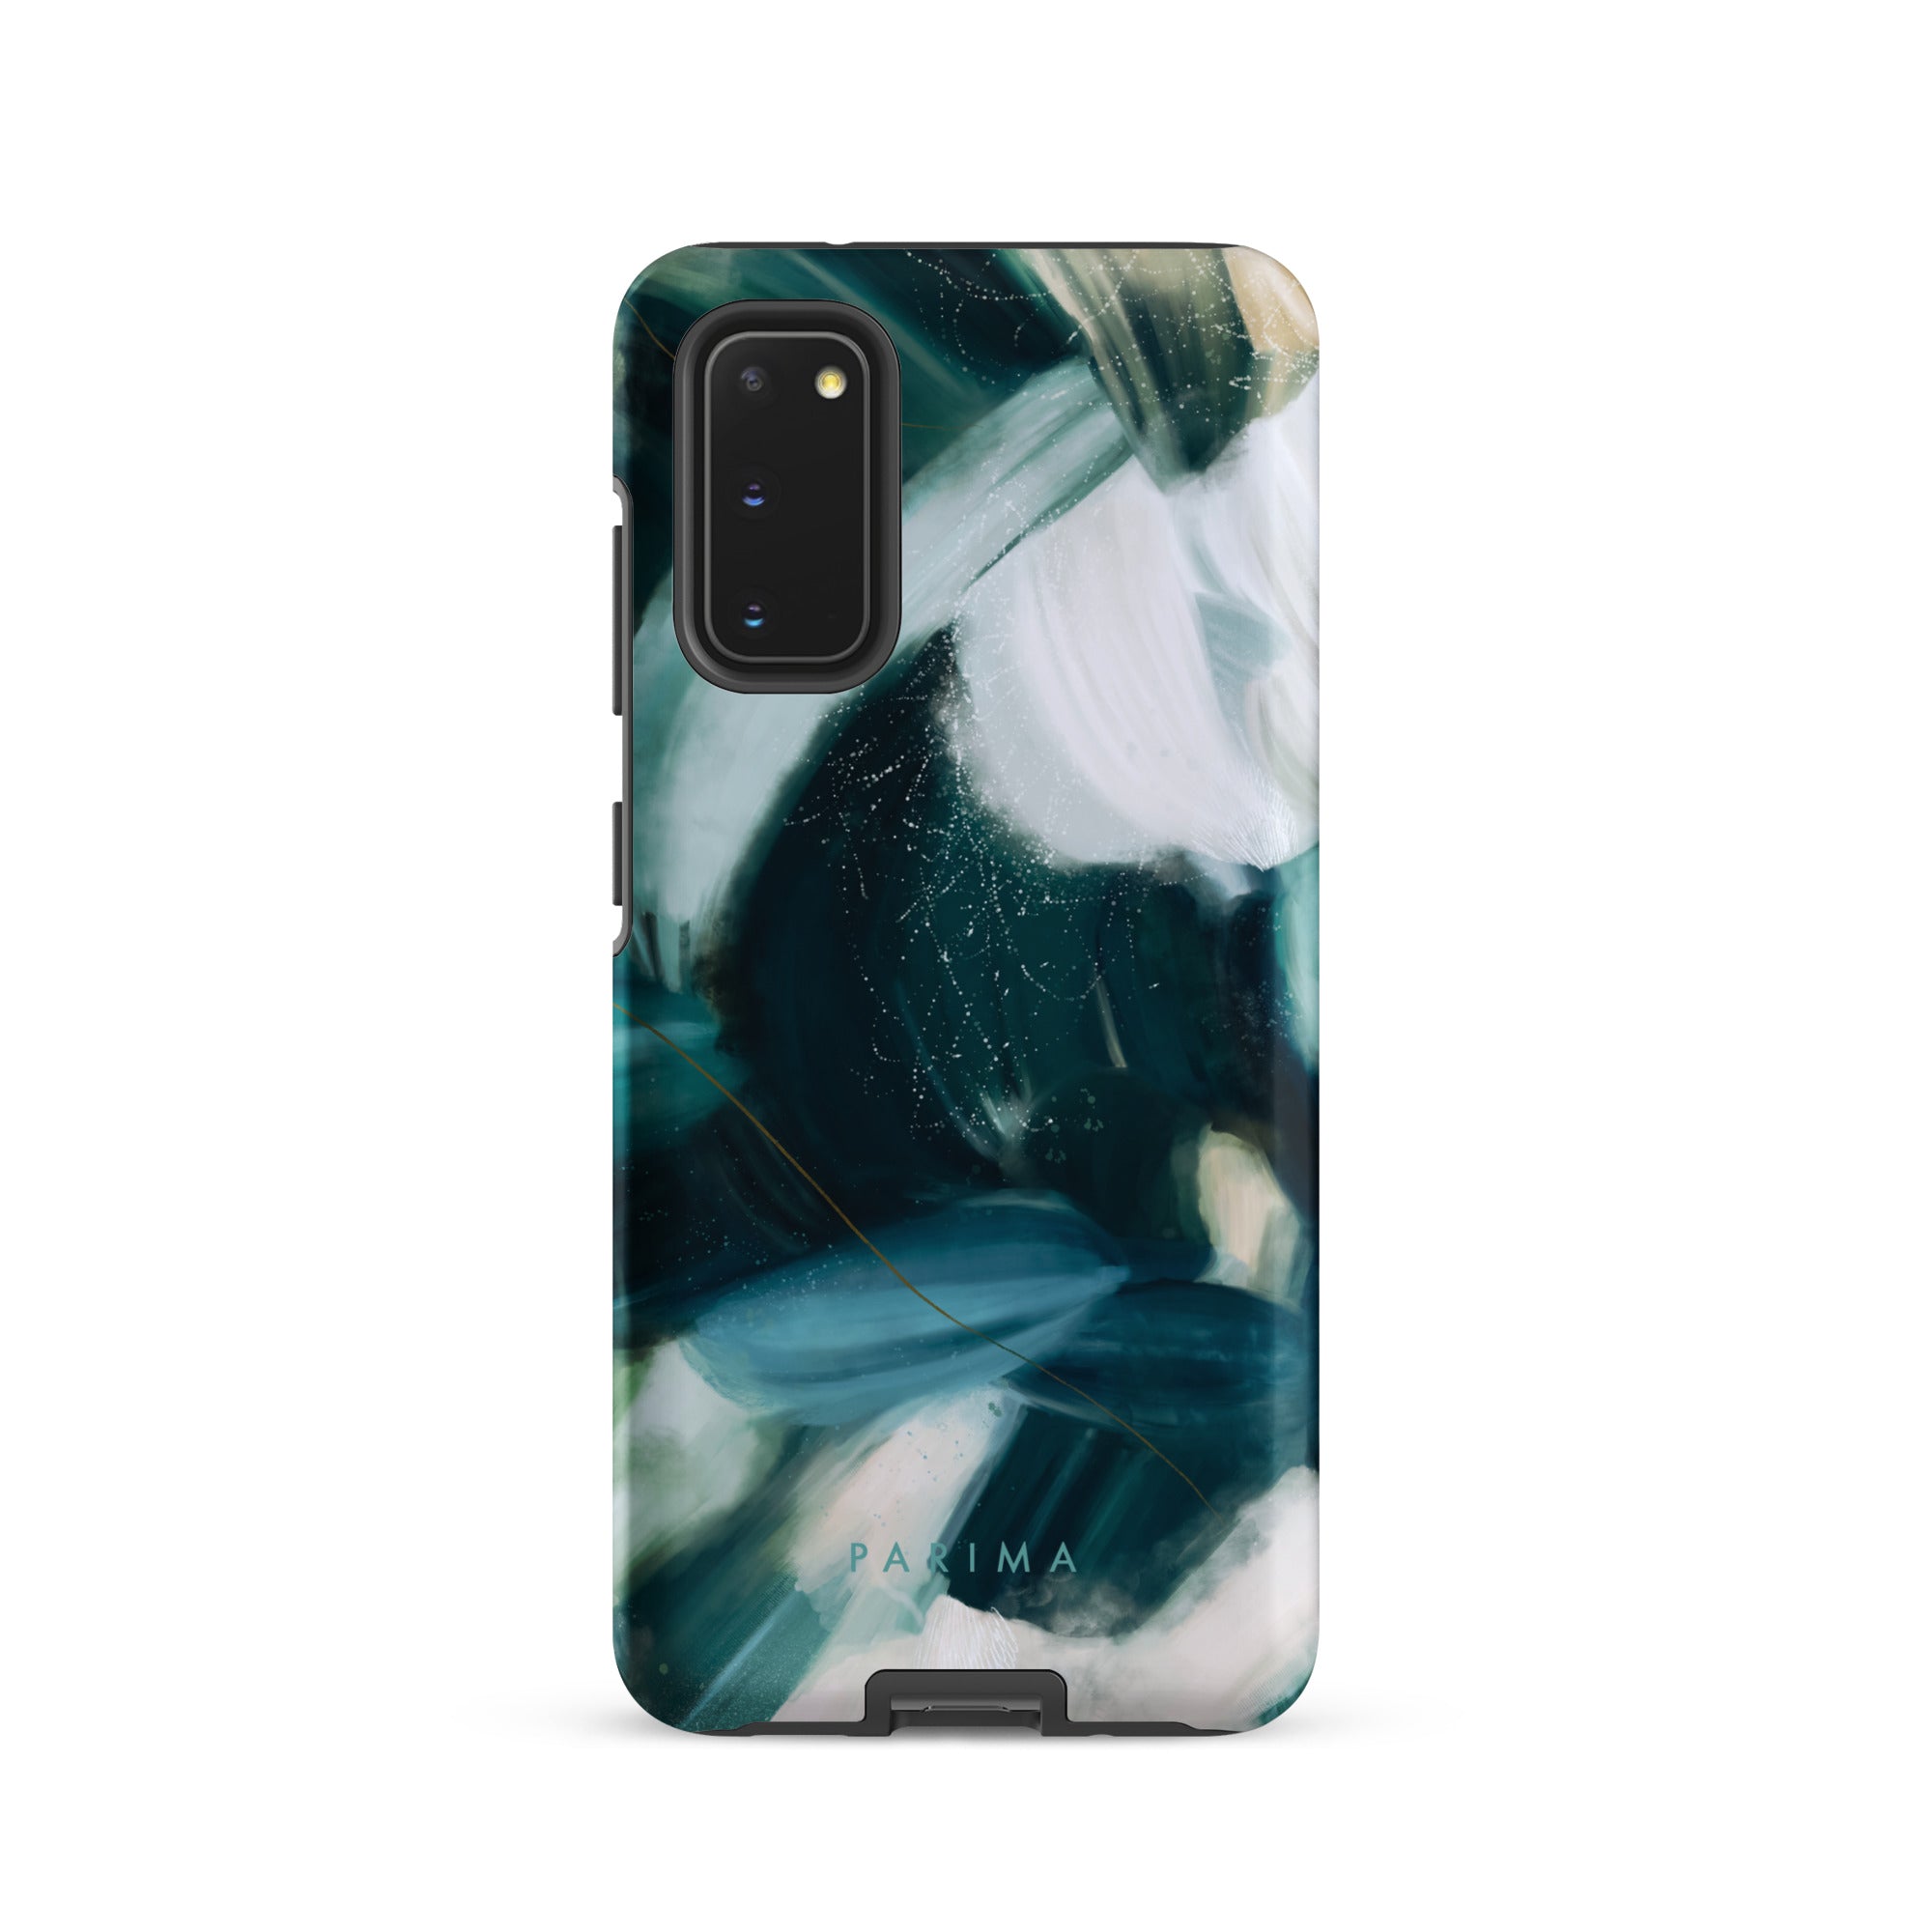 Caspian, blue and teal abstract art on Samsung Galaxy S20 tough case by Parima Studio